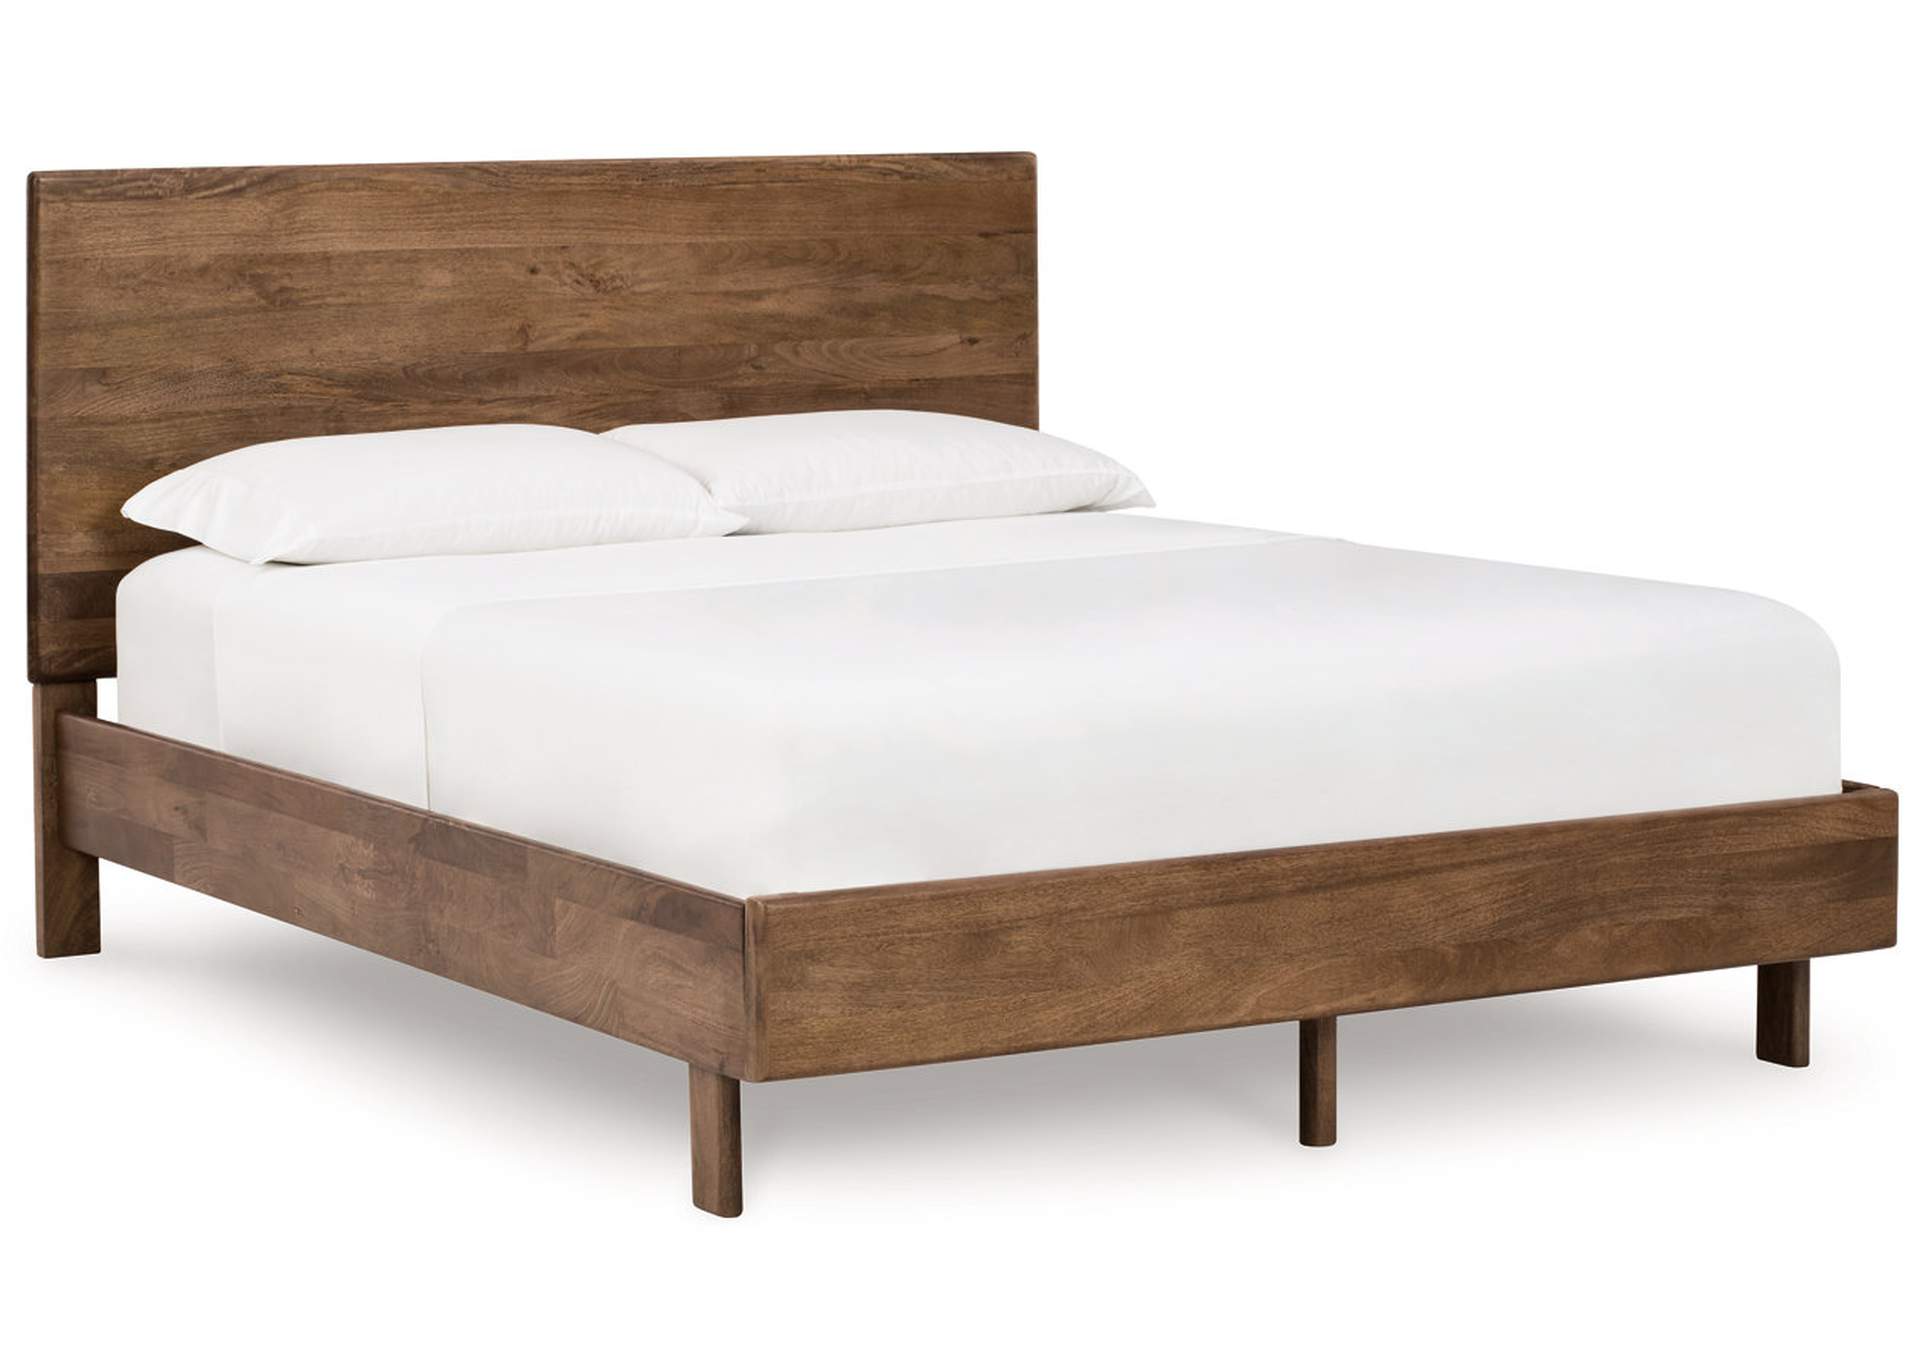 Isanti California King Panel Bed with Dresser,Millennium